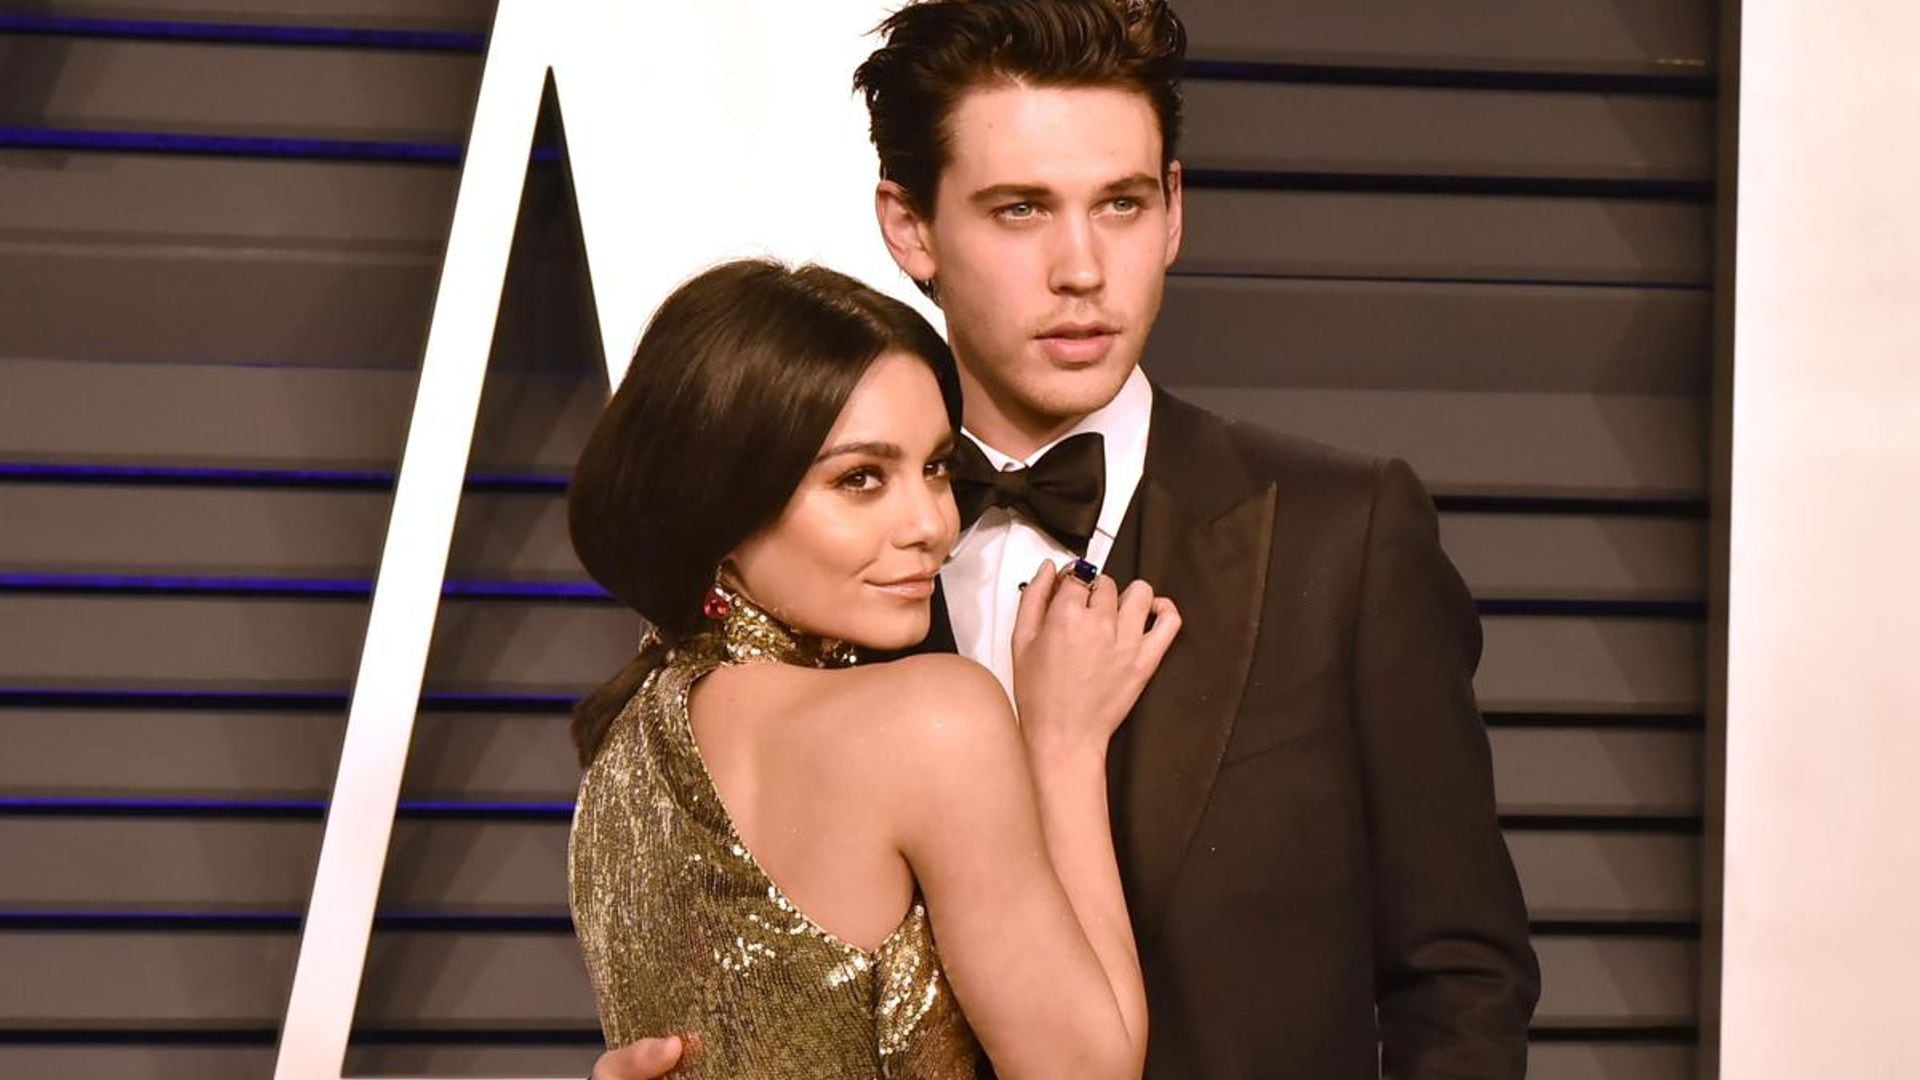 Vanessa Hudgens says Austin Butler’s breakup pushed her to ‘the right person’: ‘I’m so grateful’